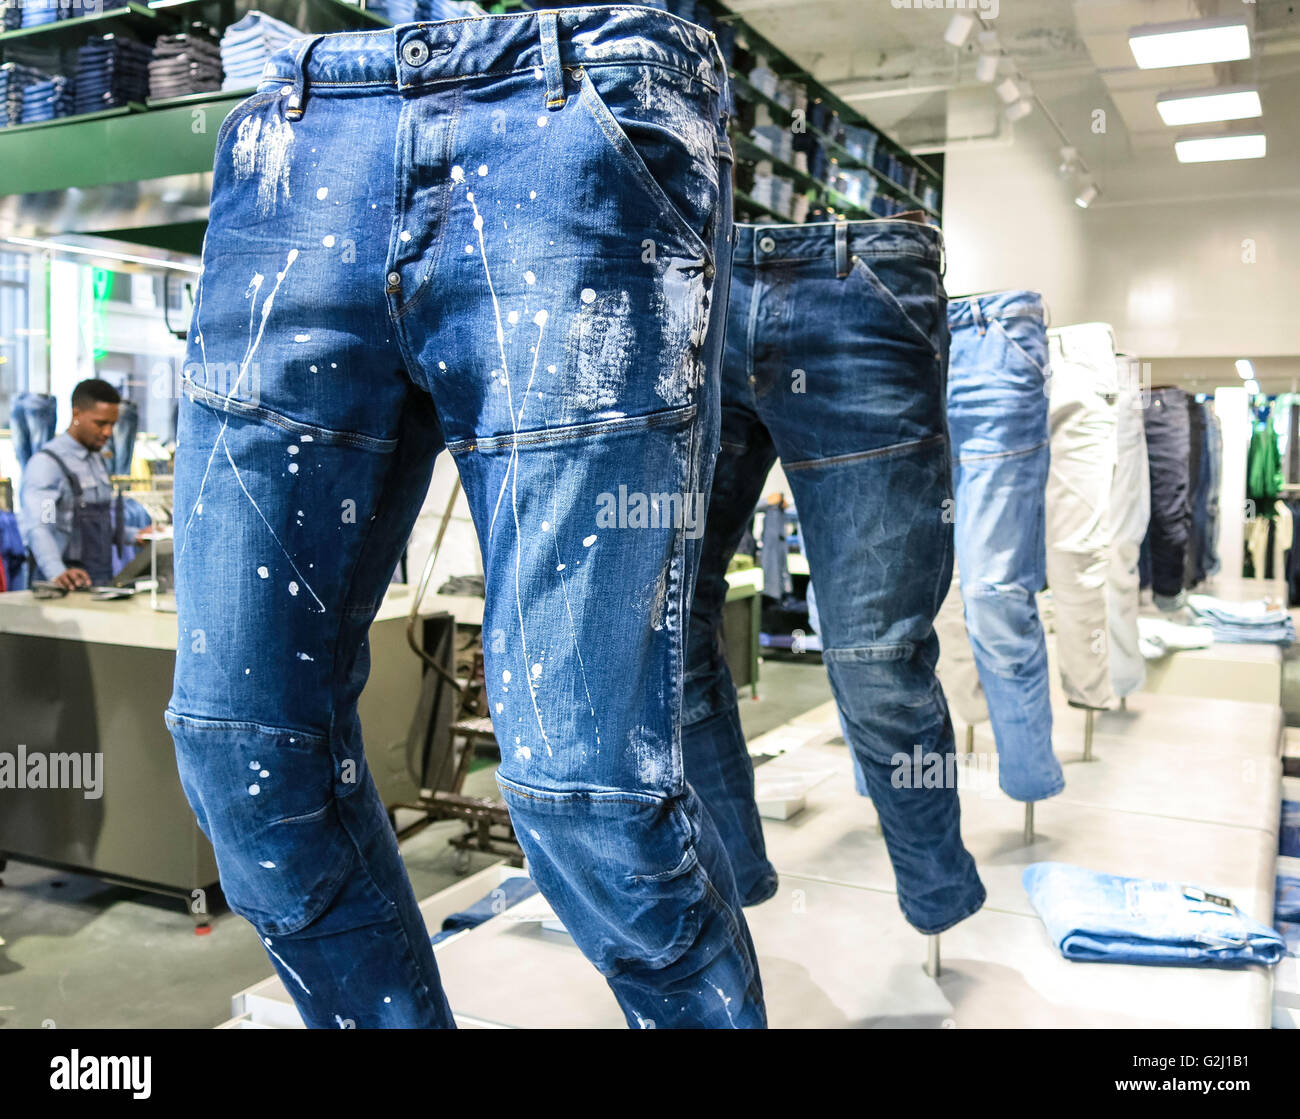 G-Star Raw Library Store, NYC Stock Photo - Alamy